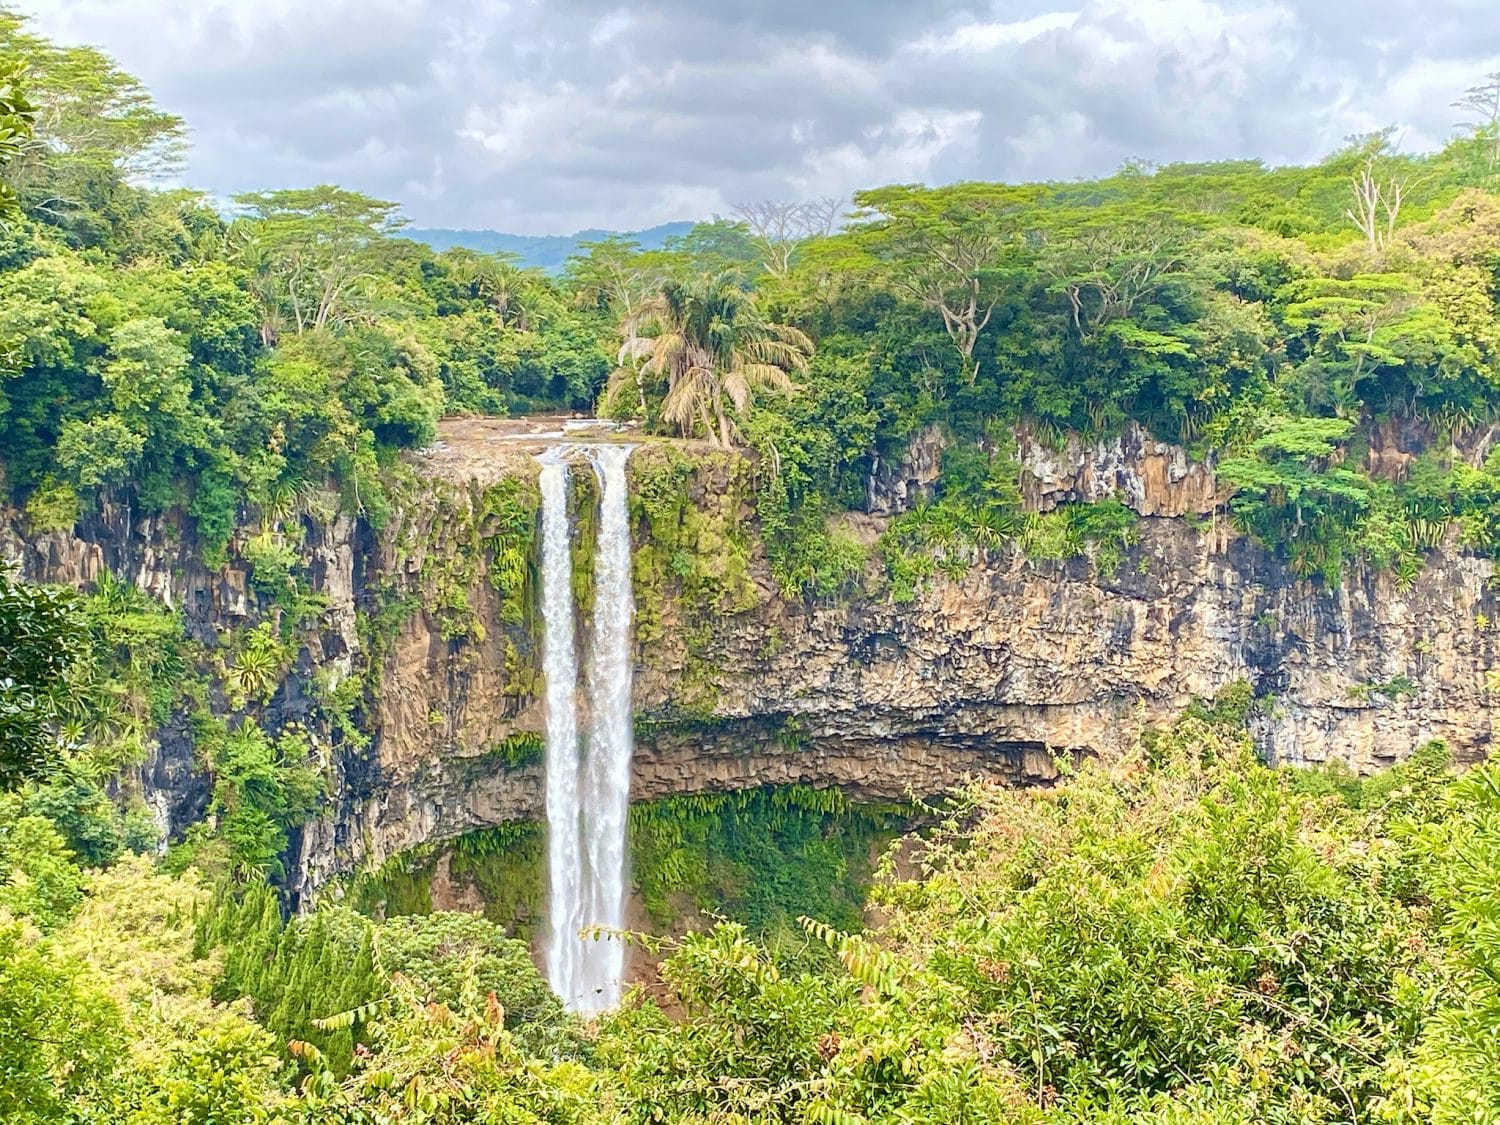 Chamarel Waterfall: The pristine jungle and waterfalls in the Black River Gorges National Park are breathtaking. © Sascha Tegtmeyer